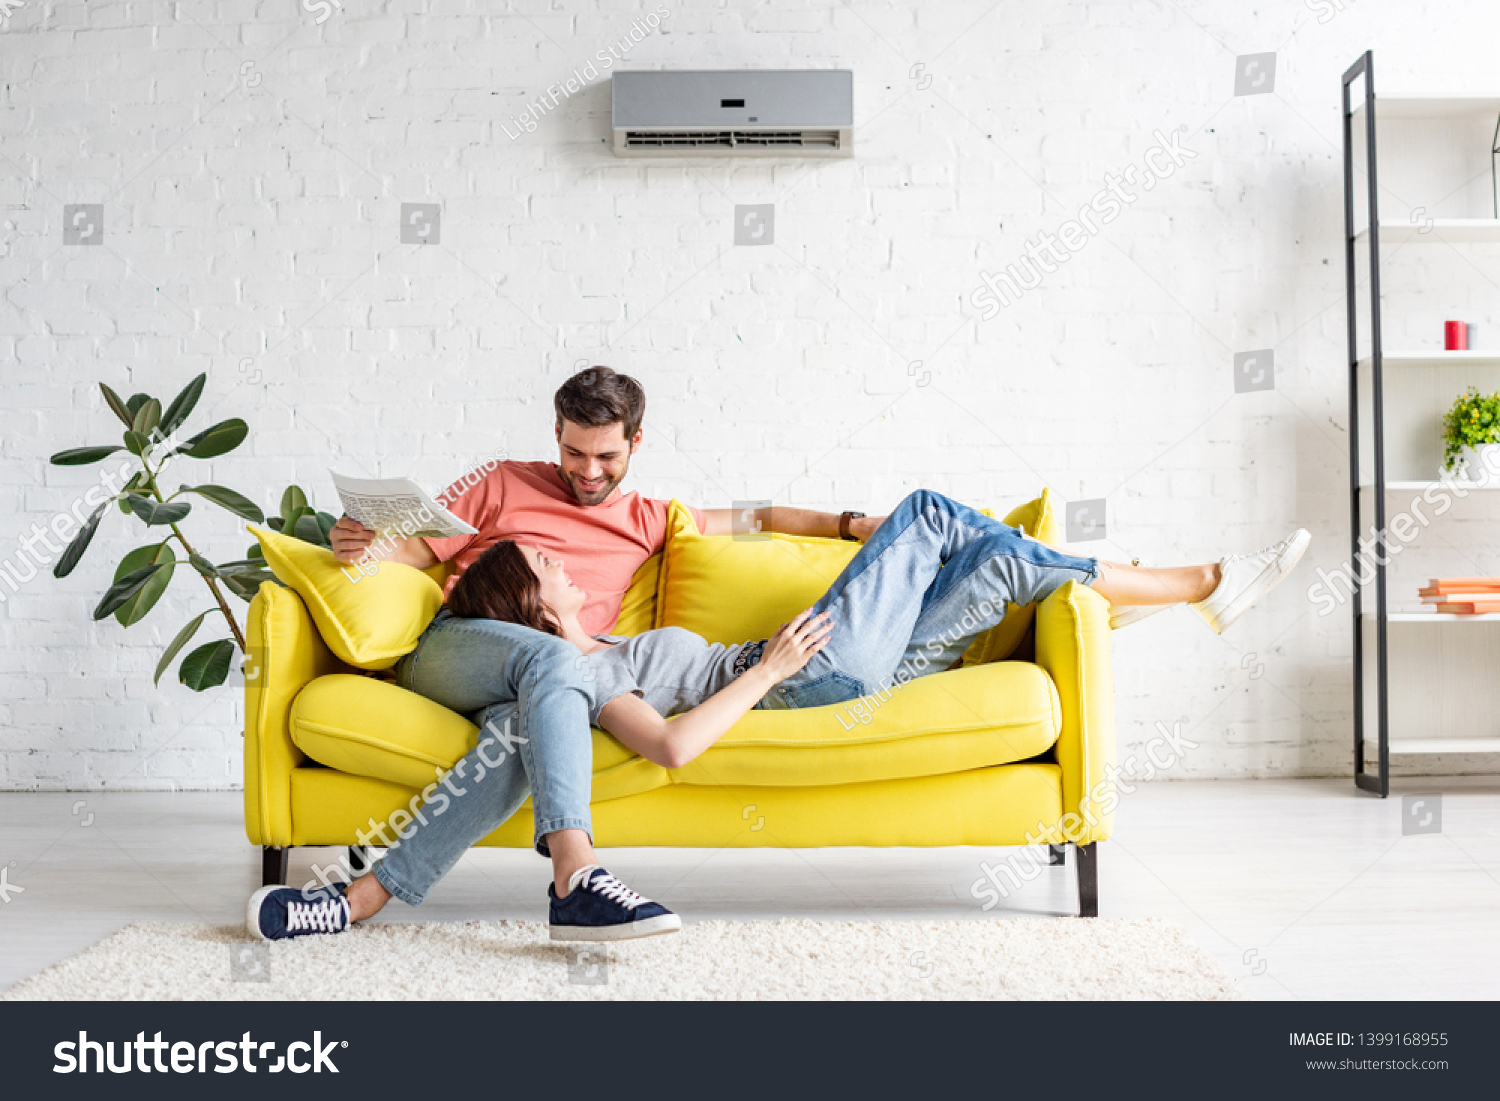 happy man with smiling girlfriend relaxing on yellow sofa under air conditioner at home #1399168955